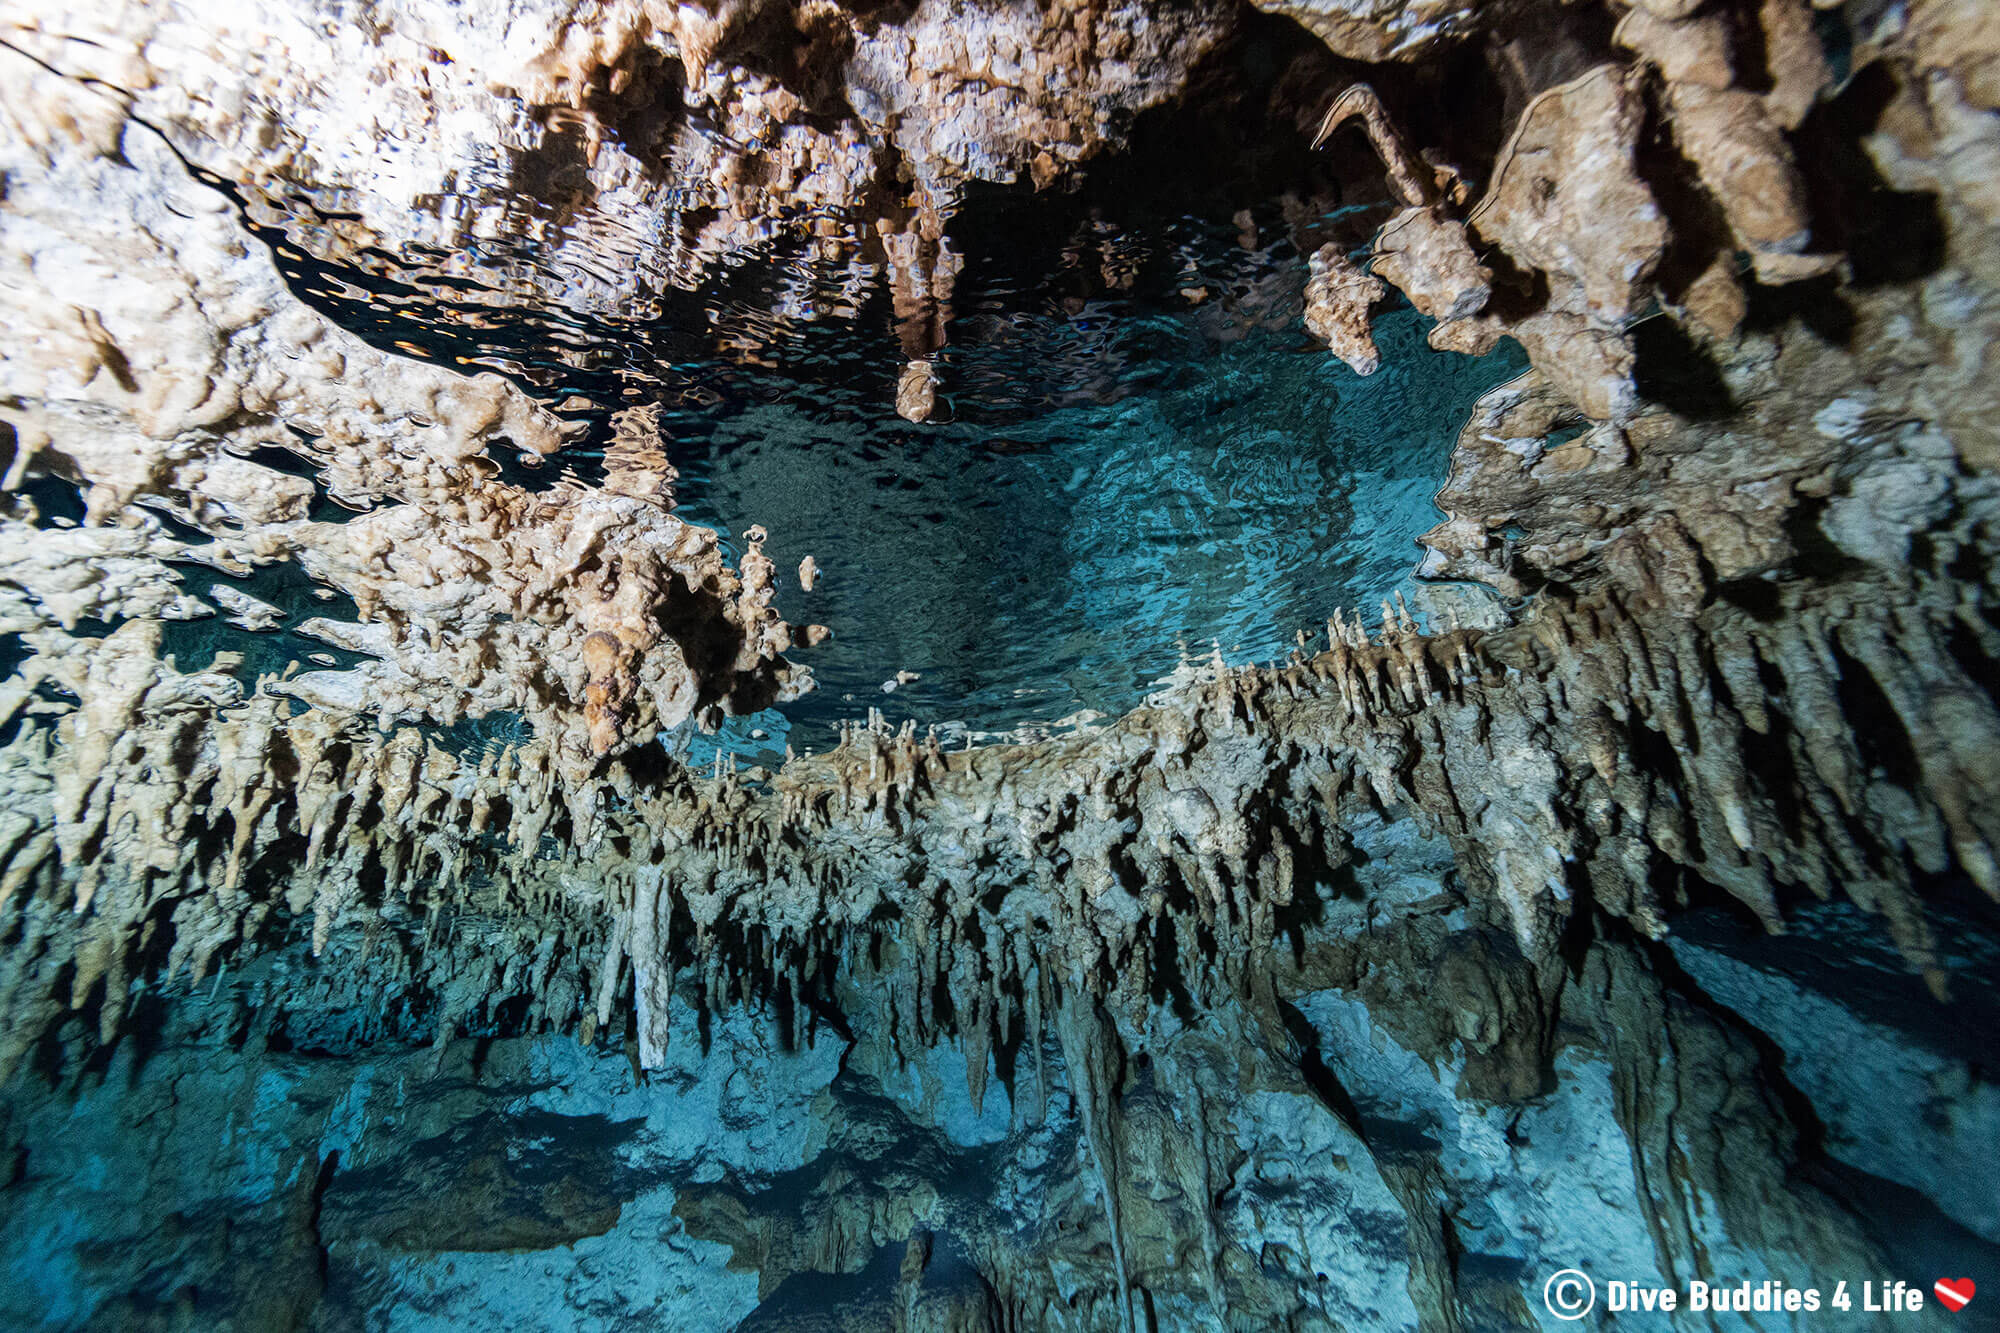 The Stalactite Covered Celling Of A Cenote Filled With Air Pockets In Tulum, Mexico